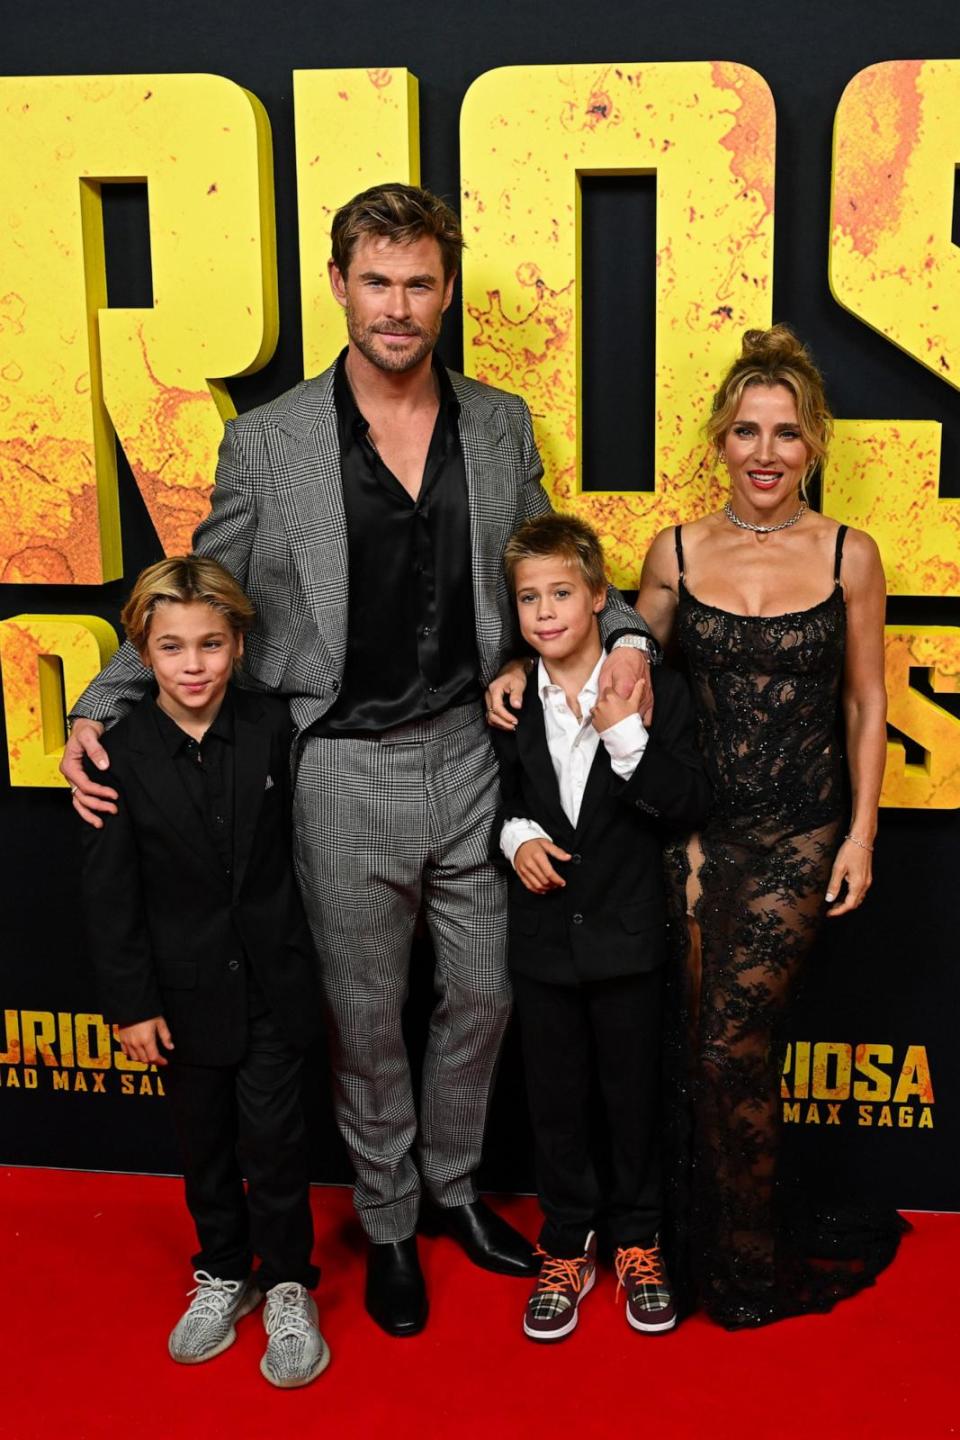 PHOTO: Chris Hemsworth and Elsa Pataky are shown with their children at the Australian Premiere of Furiosa: A Mad Max Saga, at the State Theatre, in Sydney, on May 2, 2024. (James Gourley/Shutterstock)